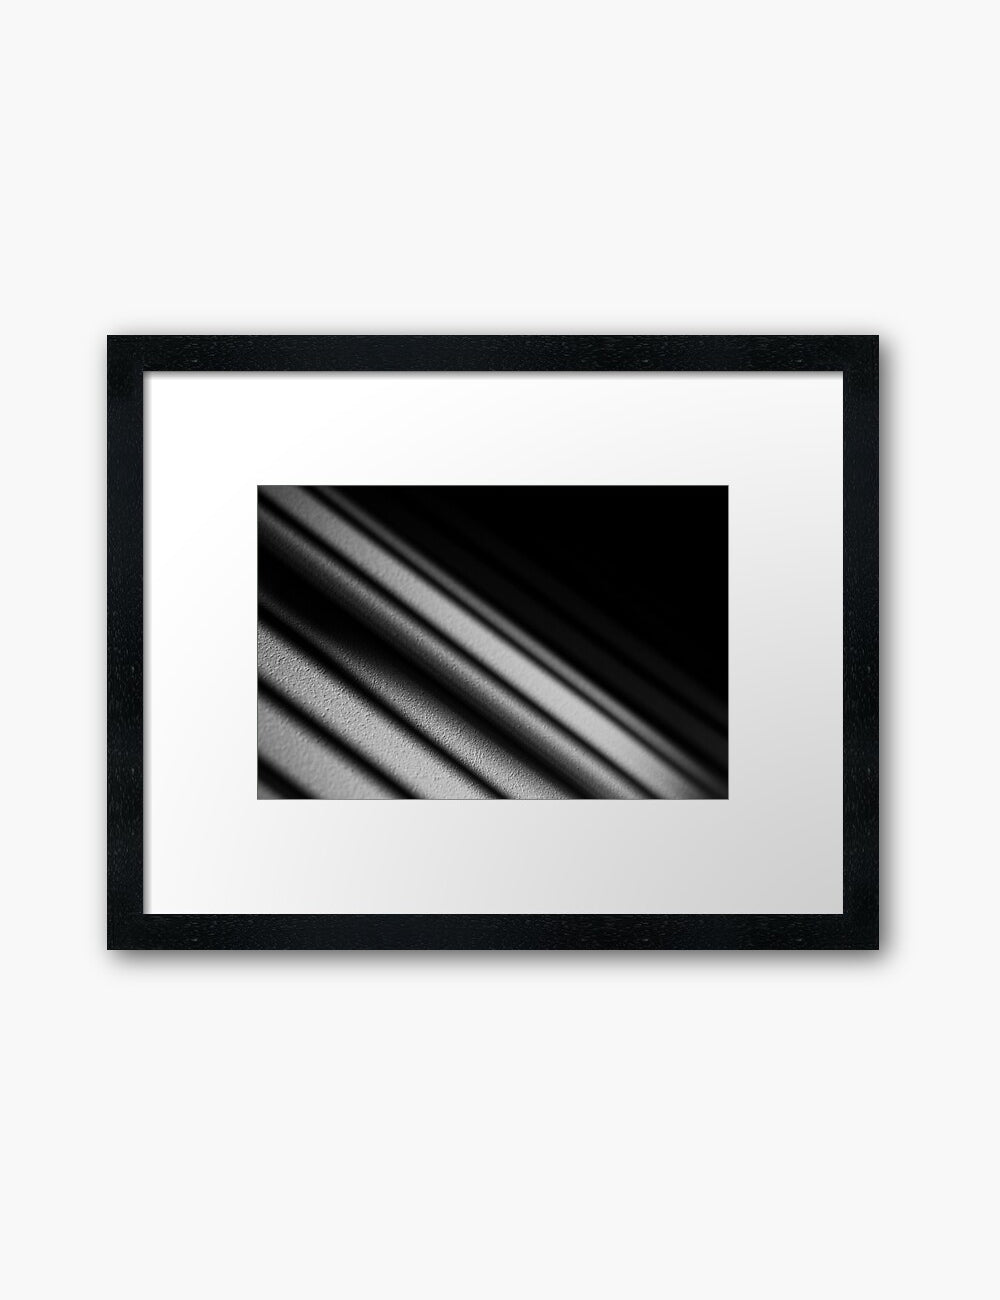 LIGHT AND SHADOW. Black and white photography. Abstract, minimalist printable wall art. - PAPER MOON Art & Design